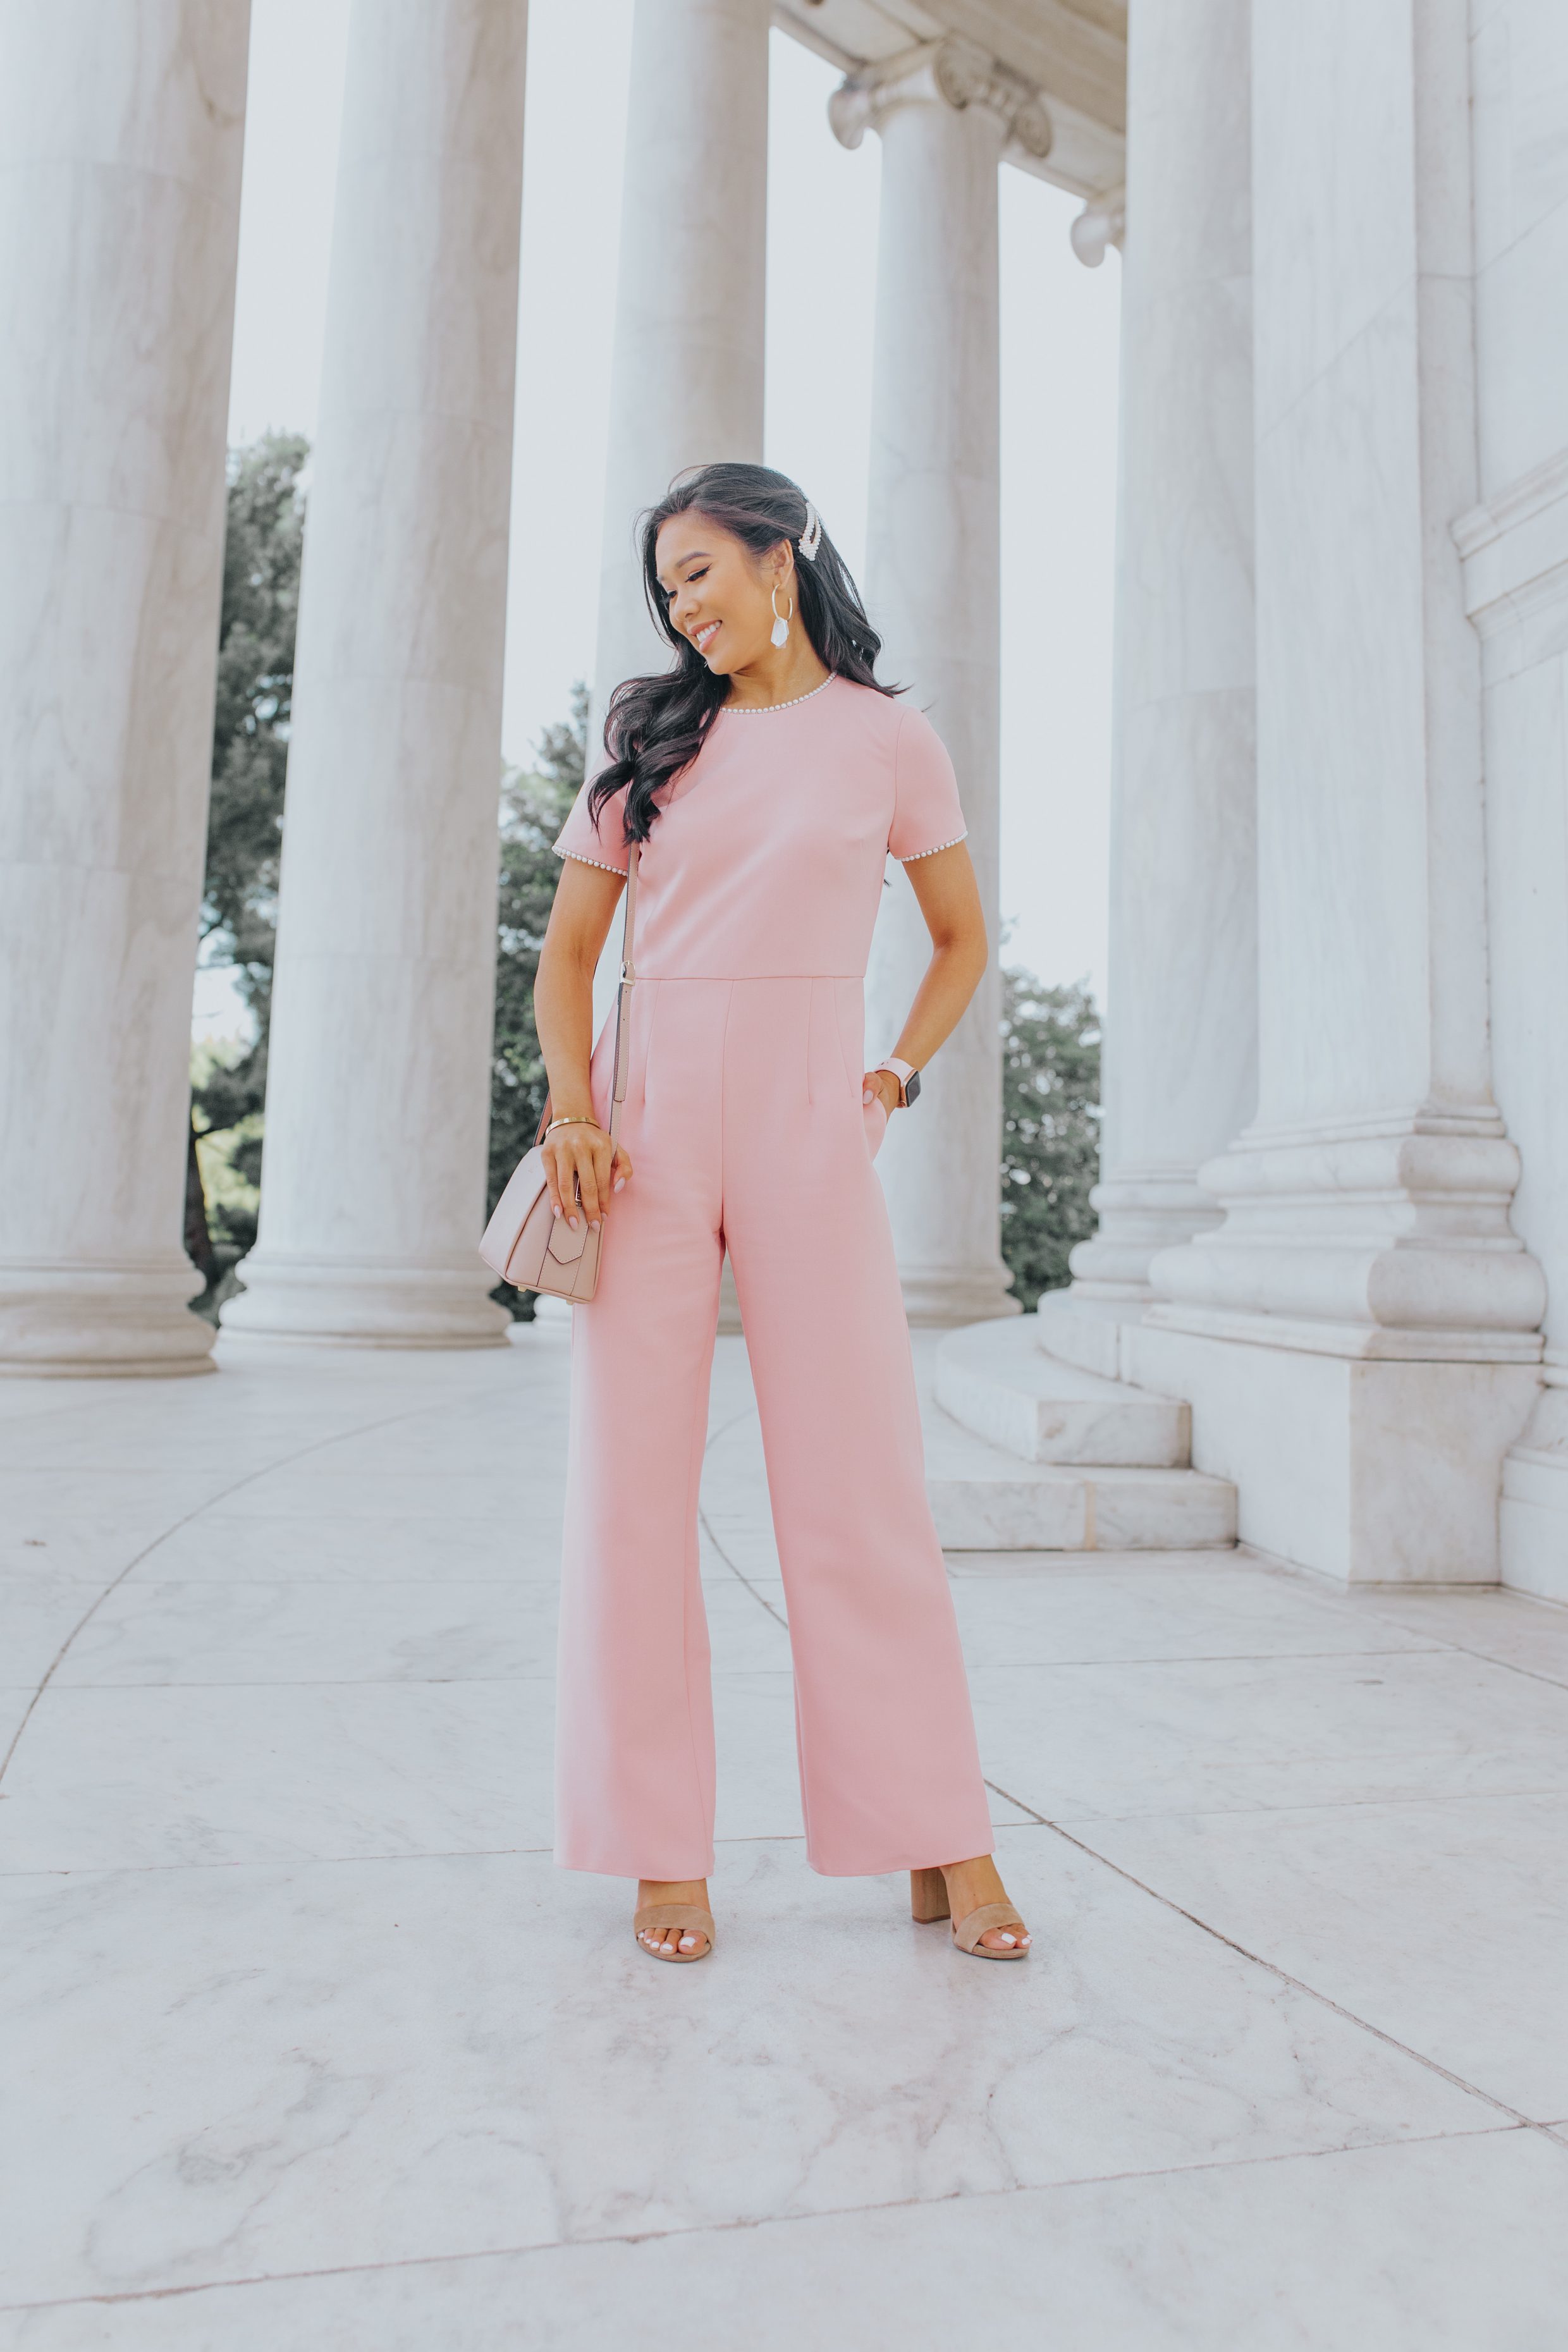 Blogger Hoang-Kim wears a pink pearl trim dressy jumpsuit from Gal Meets Glam